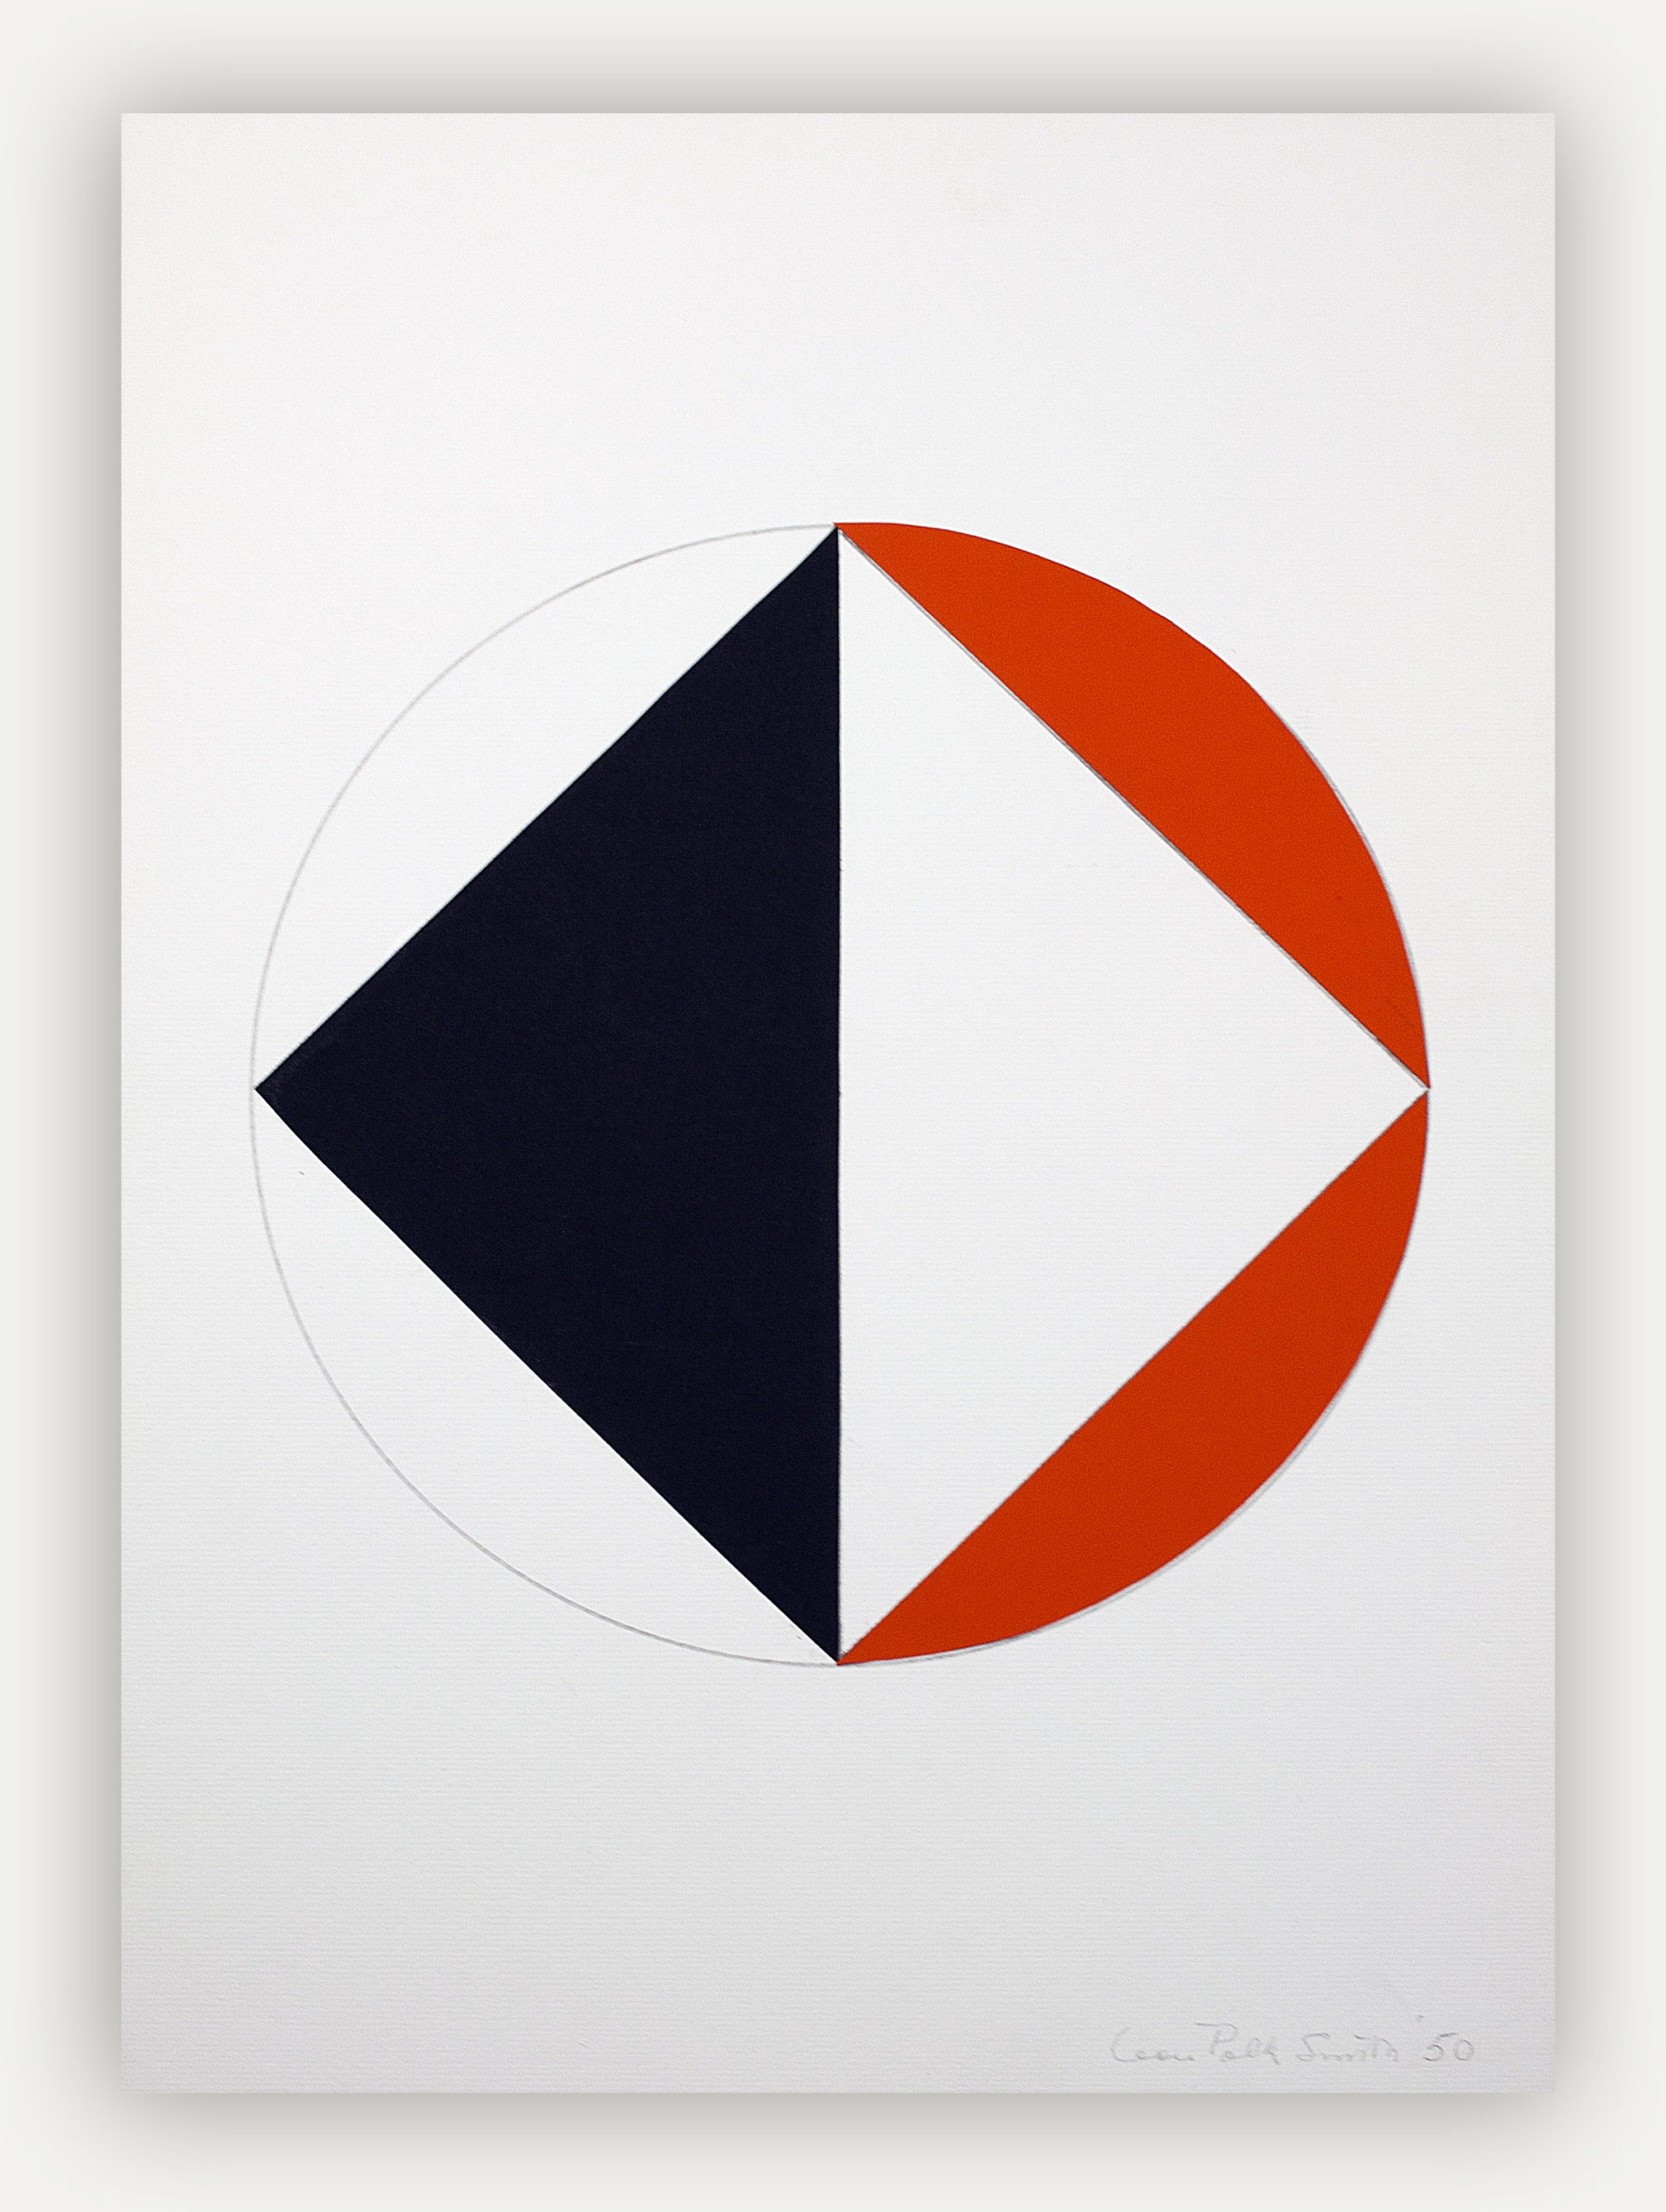 Abstract circular 'tondo' on paper by Leon Polk Smith - A square turned on it's side to form a diamond, cut in half, the left side black and the right side white. The space left within the circle on the left is white and red on the right. The overall feel of this painting is that of start geometric primitive shapes perfectly aligning with each other to form a centered balance.